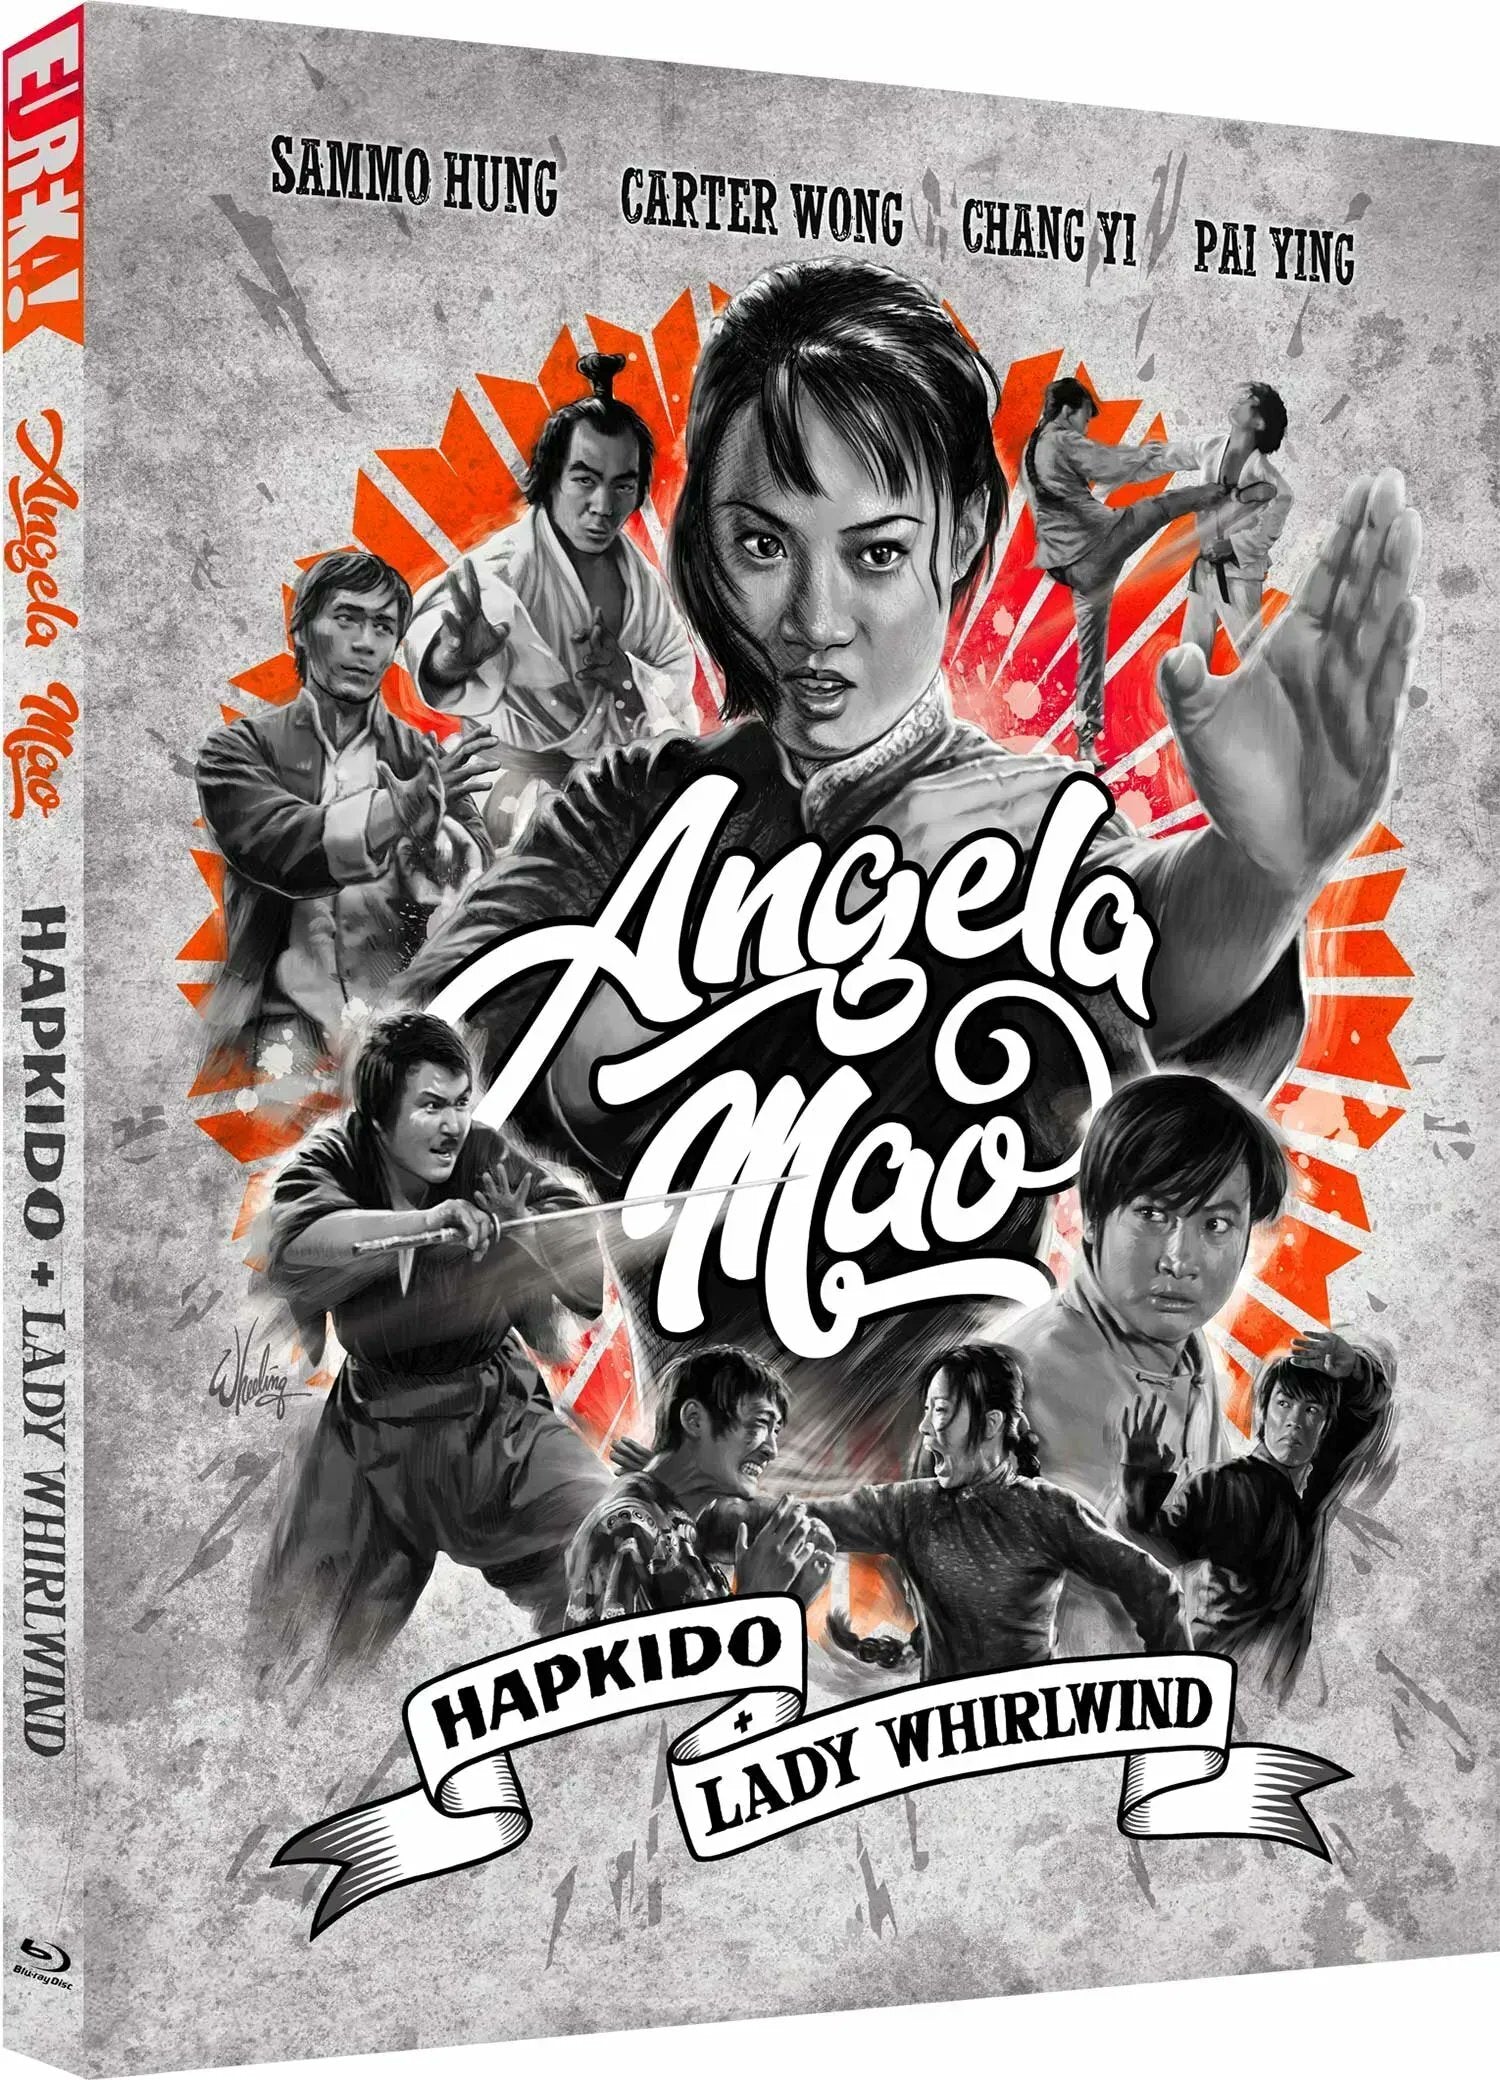 ANGELA MAO: HAPKIDO AND LADY WHIRLWIND (REGION B IMPORT - LIMITED EDITION) BLU-RAY